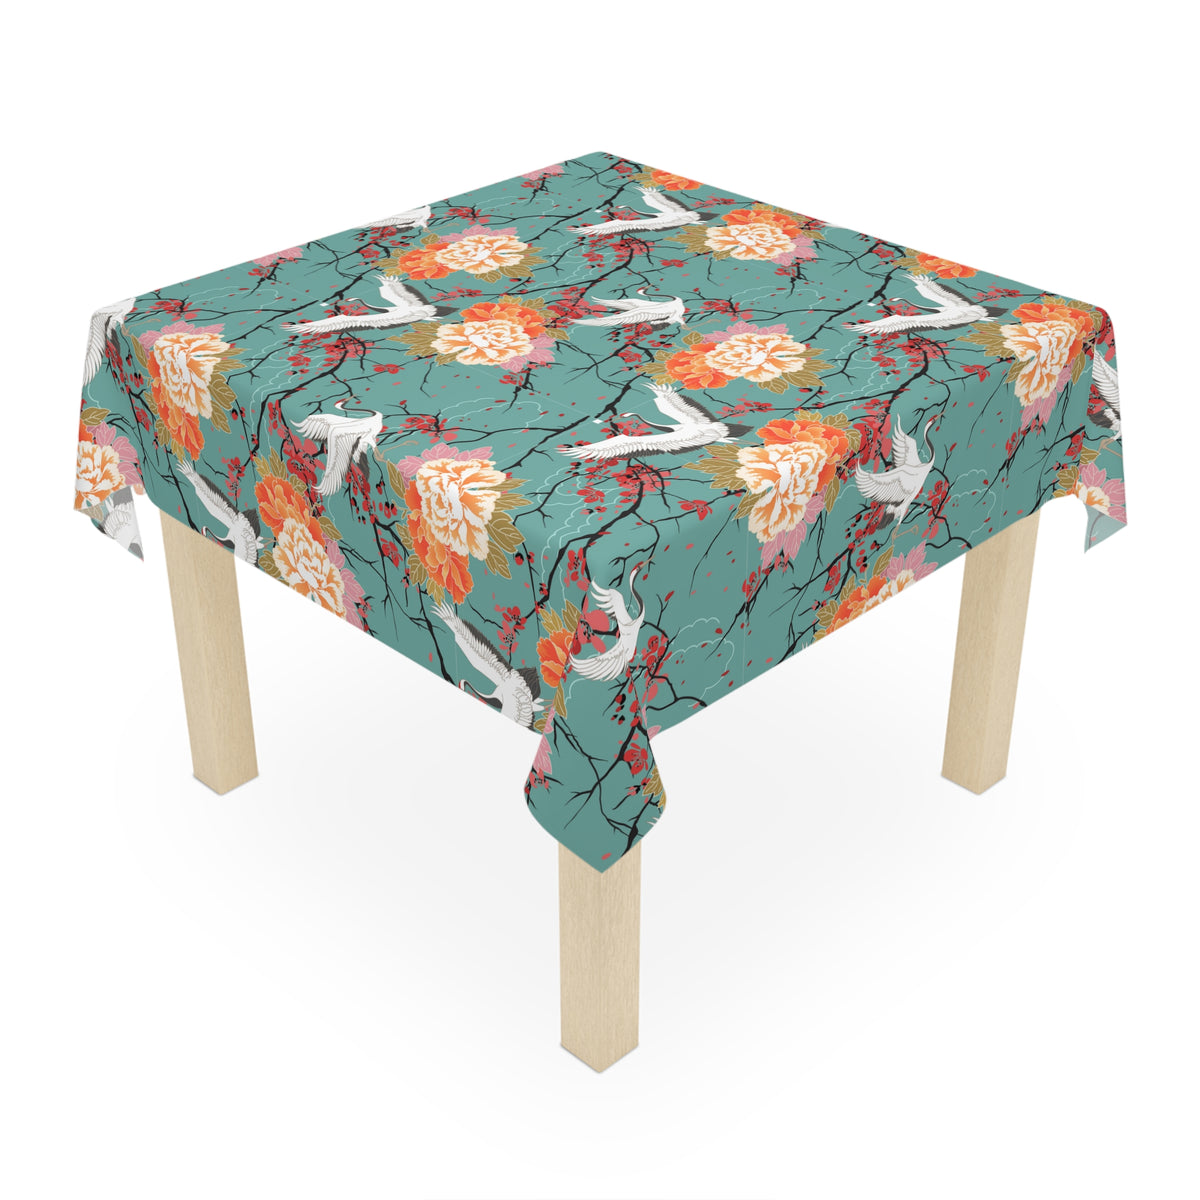 Decorative Tablecloth with Cherry and Crane Design, Durable Polyester (55.1&quot; x 55.1&quot;)